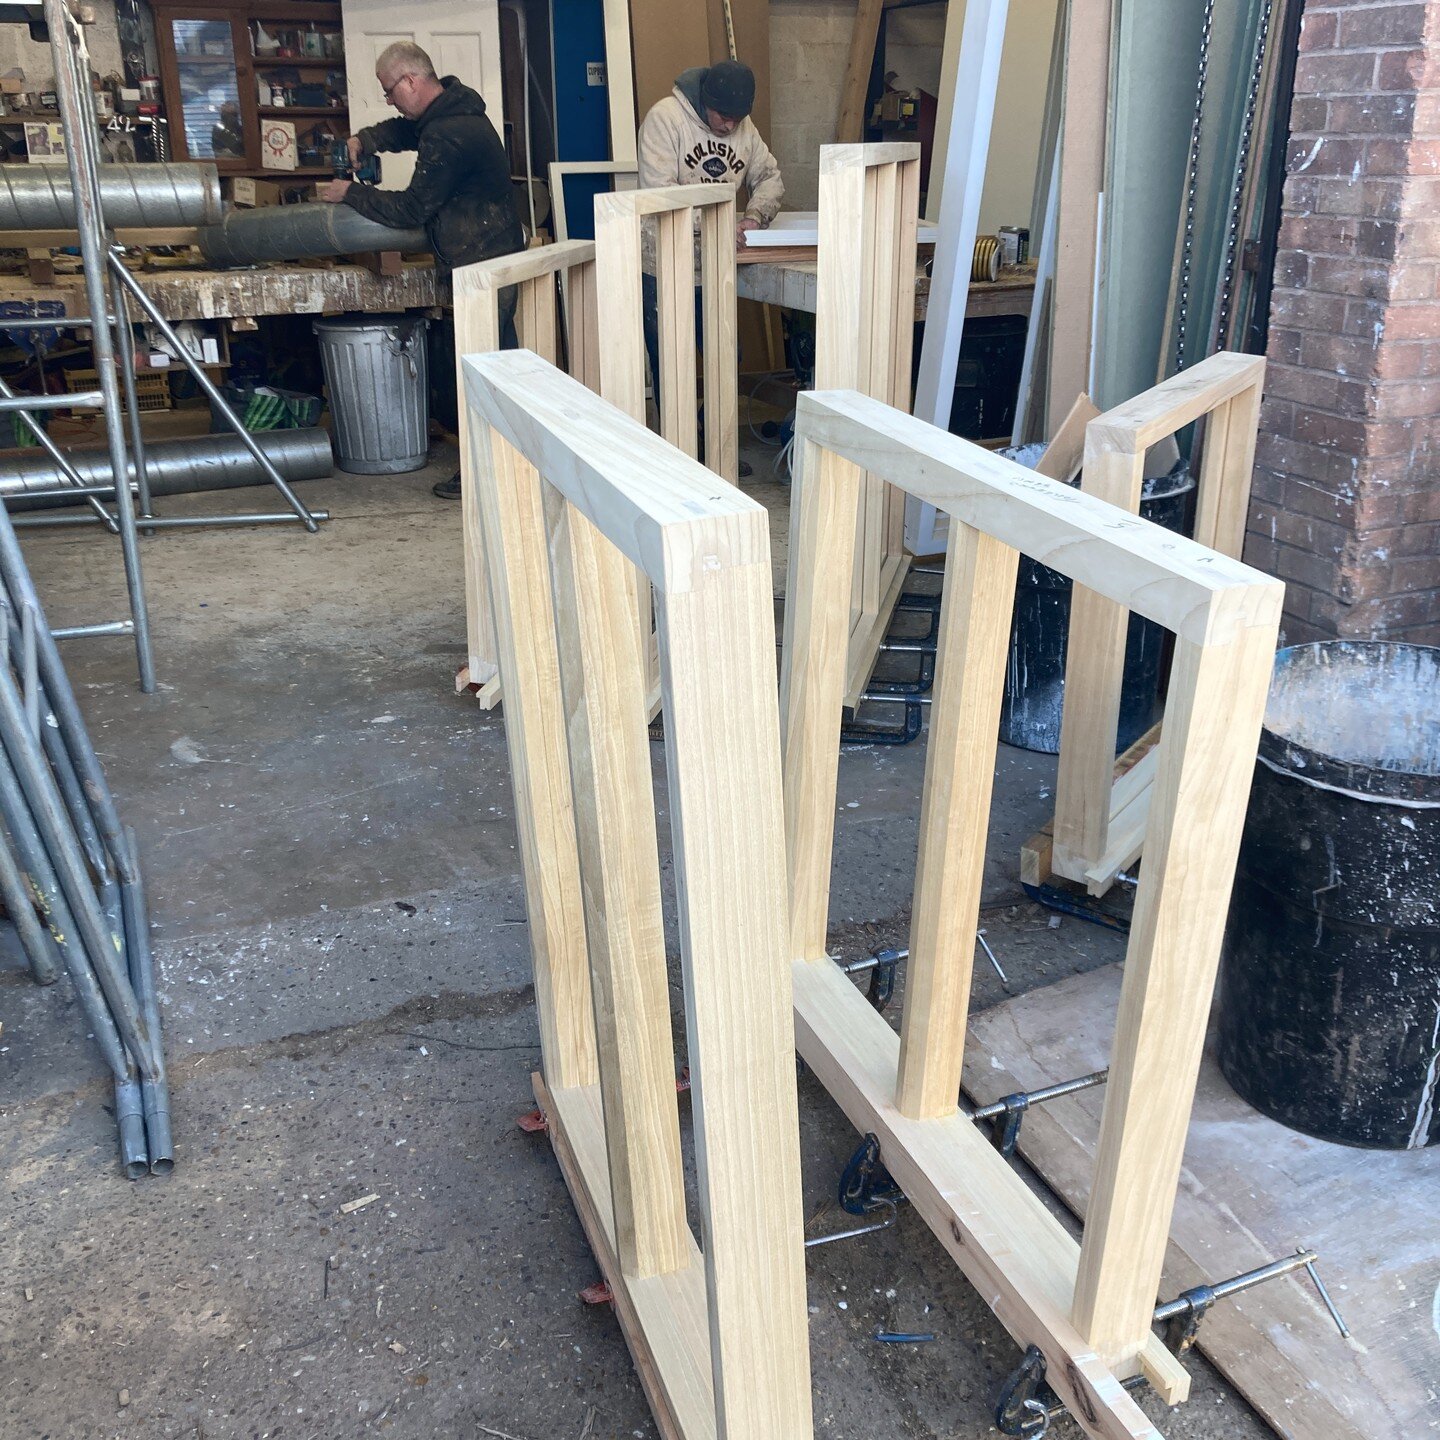 Recent visit to Avoncroft Joinery Ltd, a father and son family business. Always nice to see traditional joinery being made and discuss the bespoke timber windows and doors for a project in Worcestershire. 
#building #joinery #timber #architecture #co